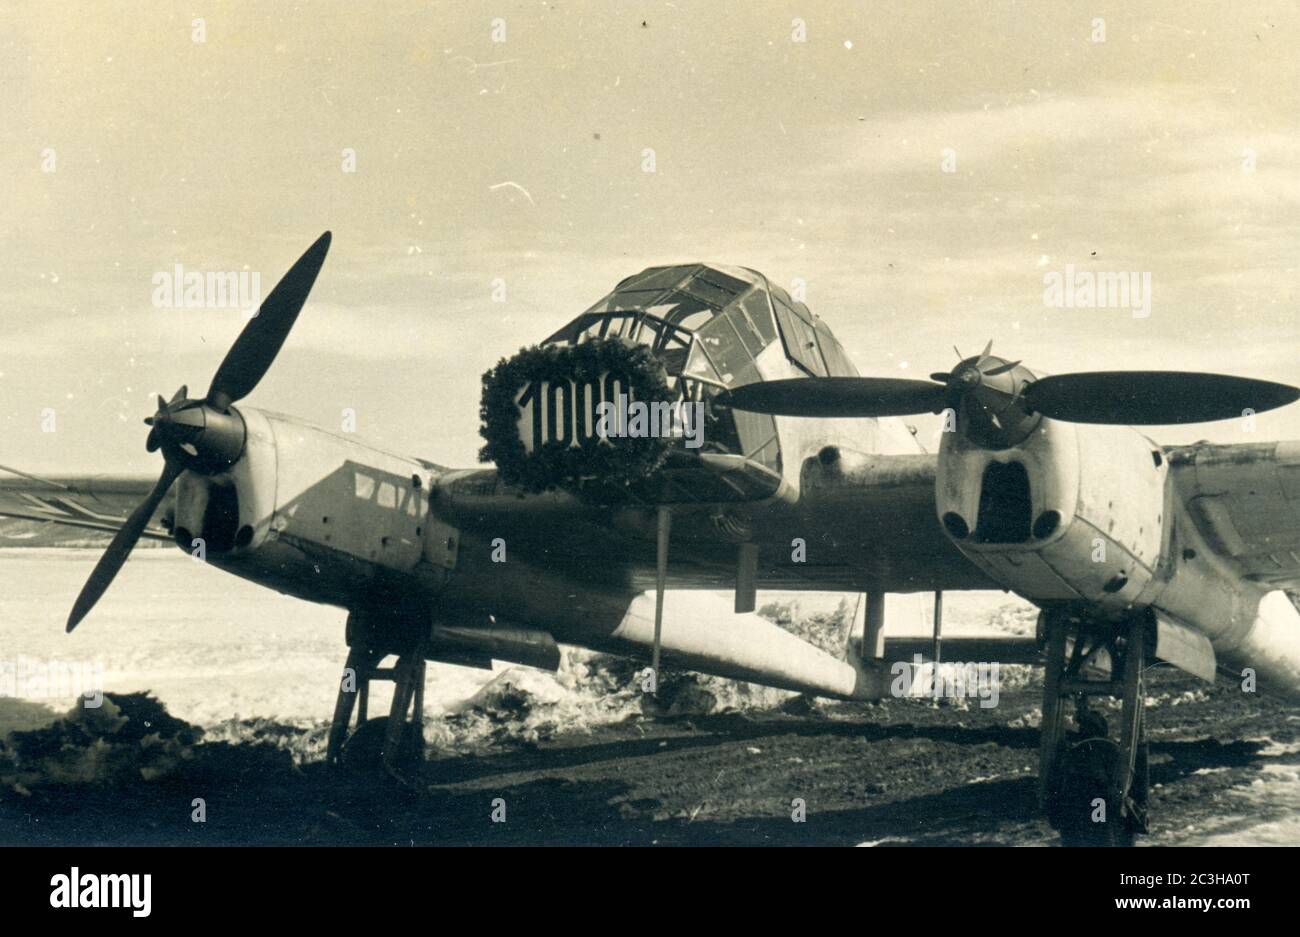 Second World War / WW2 - German reconnaissance aircraft Focke-Wulf Fw 189, aerial warfare, probably East Front, Russia - 1000 missions! Stock Photo